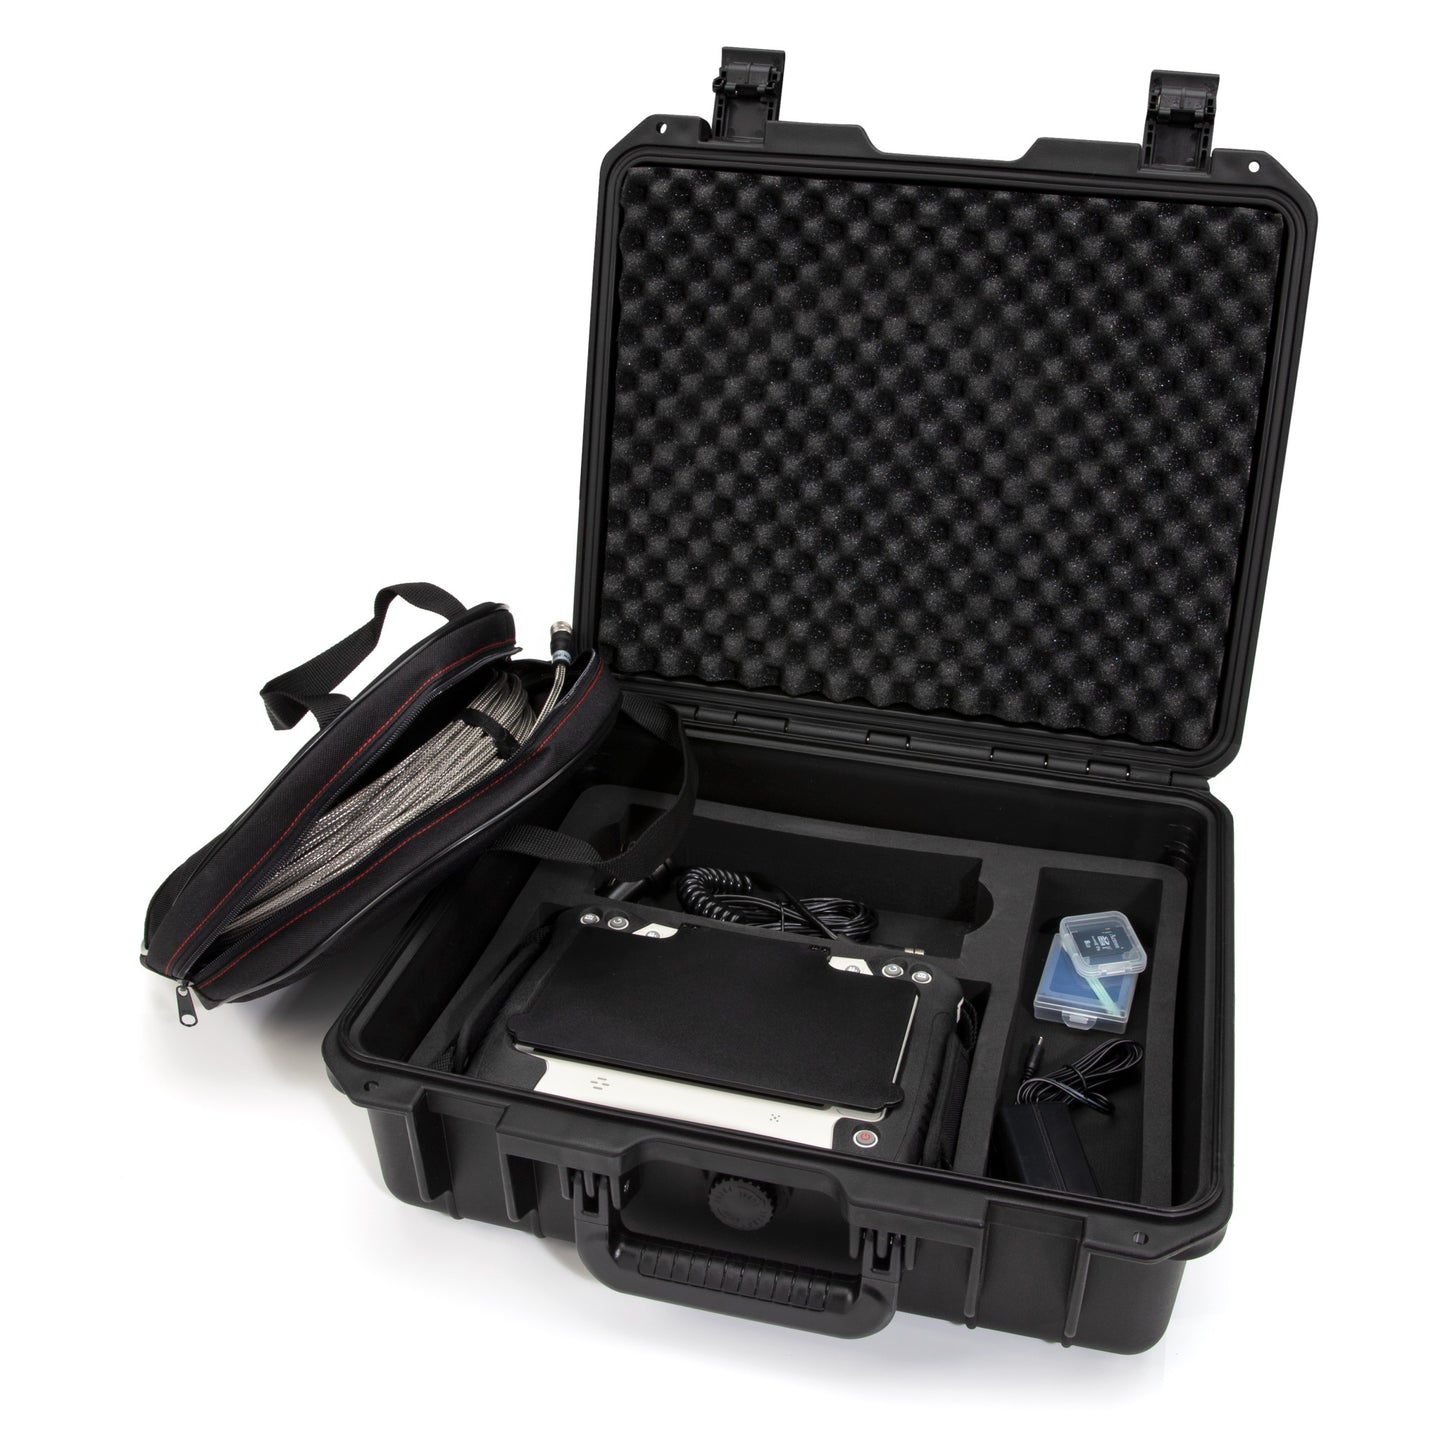 7-inch Portable Industrial Video Scope with 5.5mm Diameter Camera Shaft